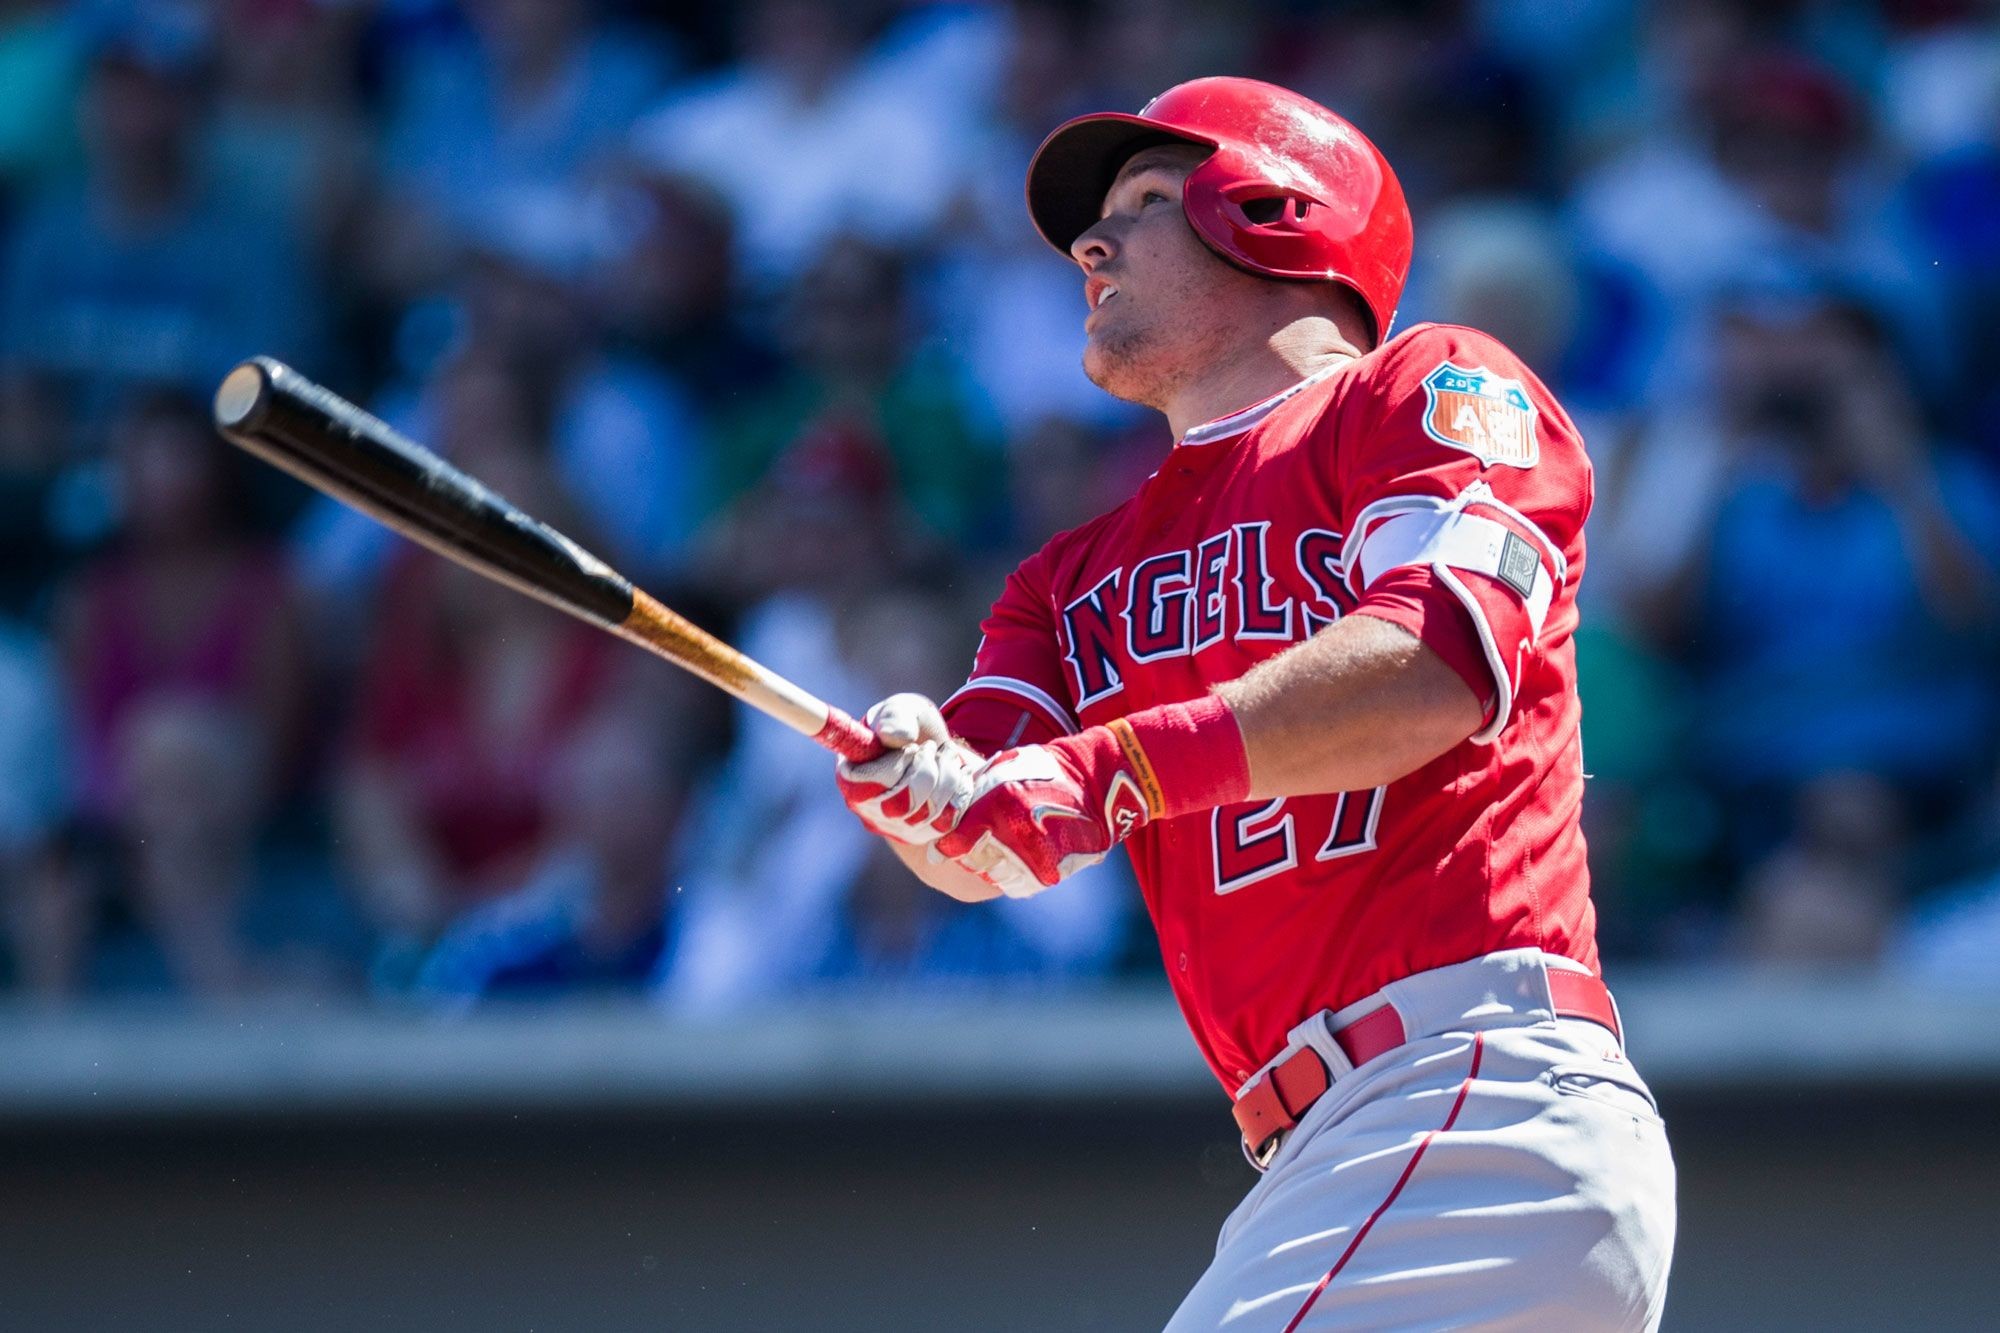 2000x1333 This could be MVP Mike Trout's next career when he's done playing baseball